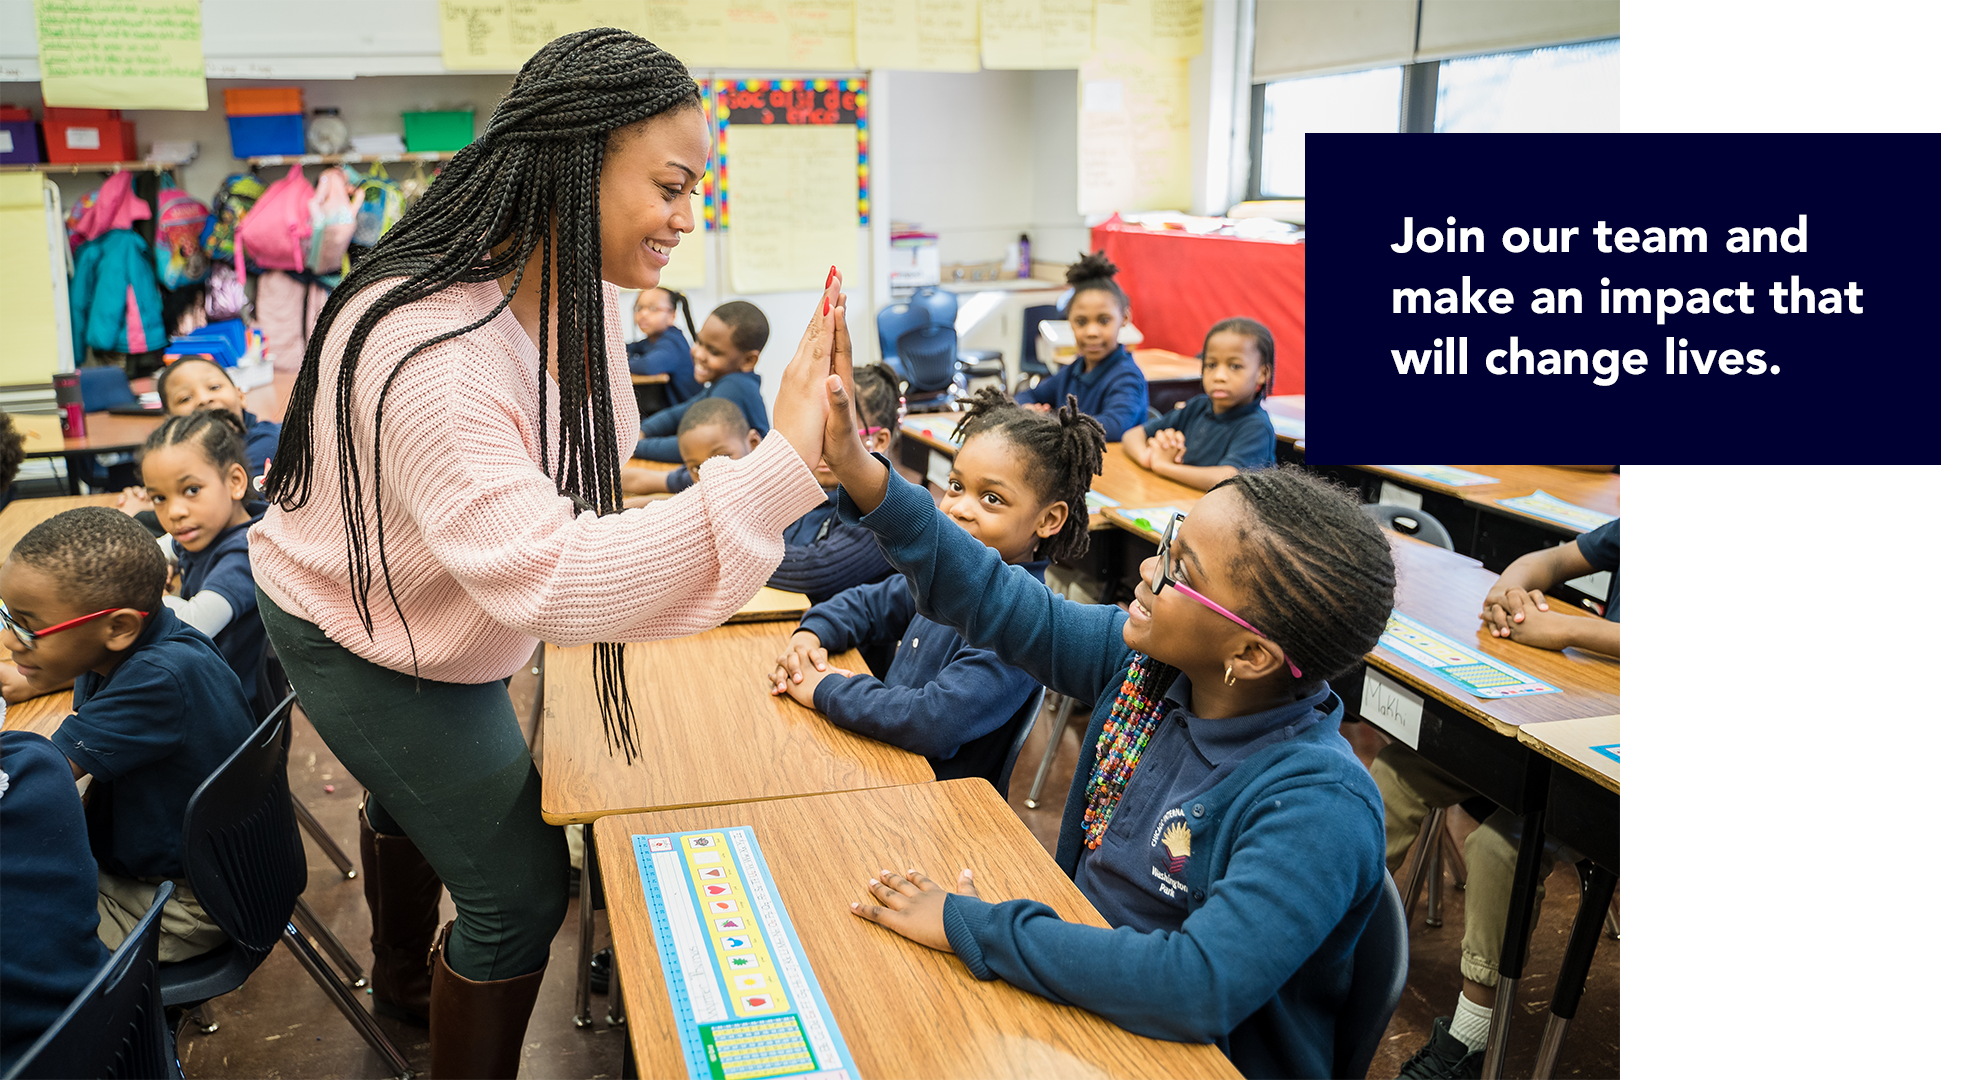 Join our team and make an impact that will change lives. Teacher giving student a high five.